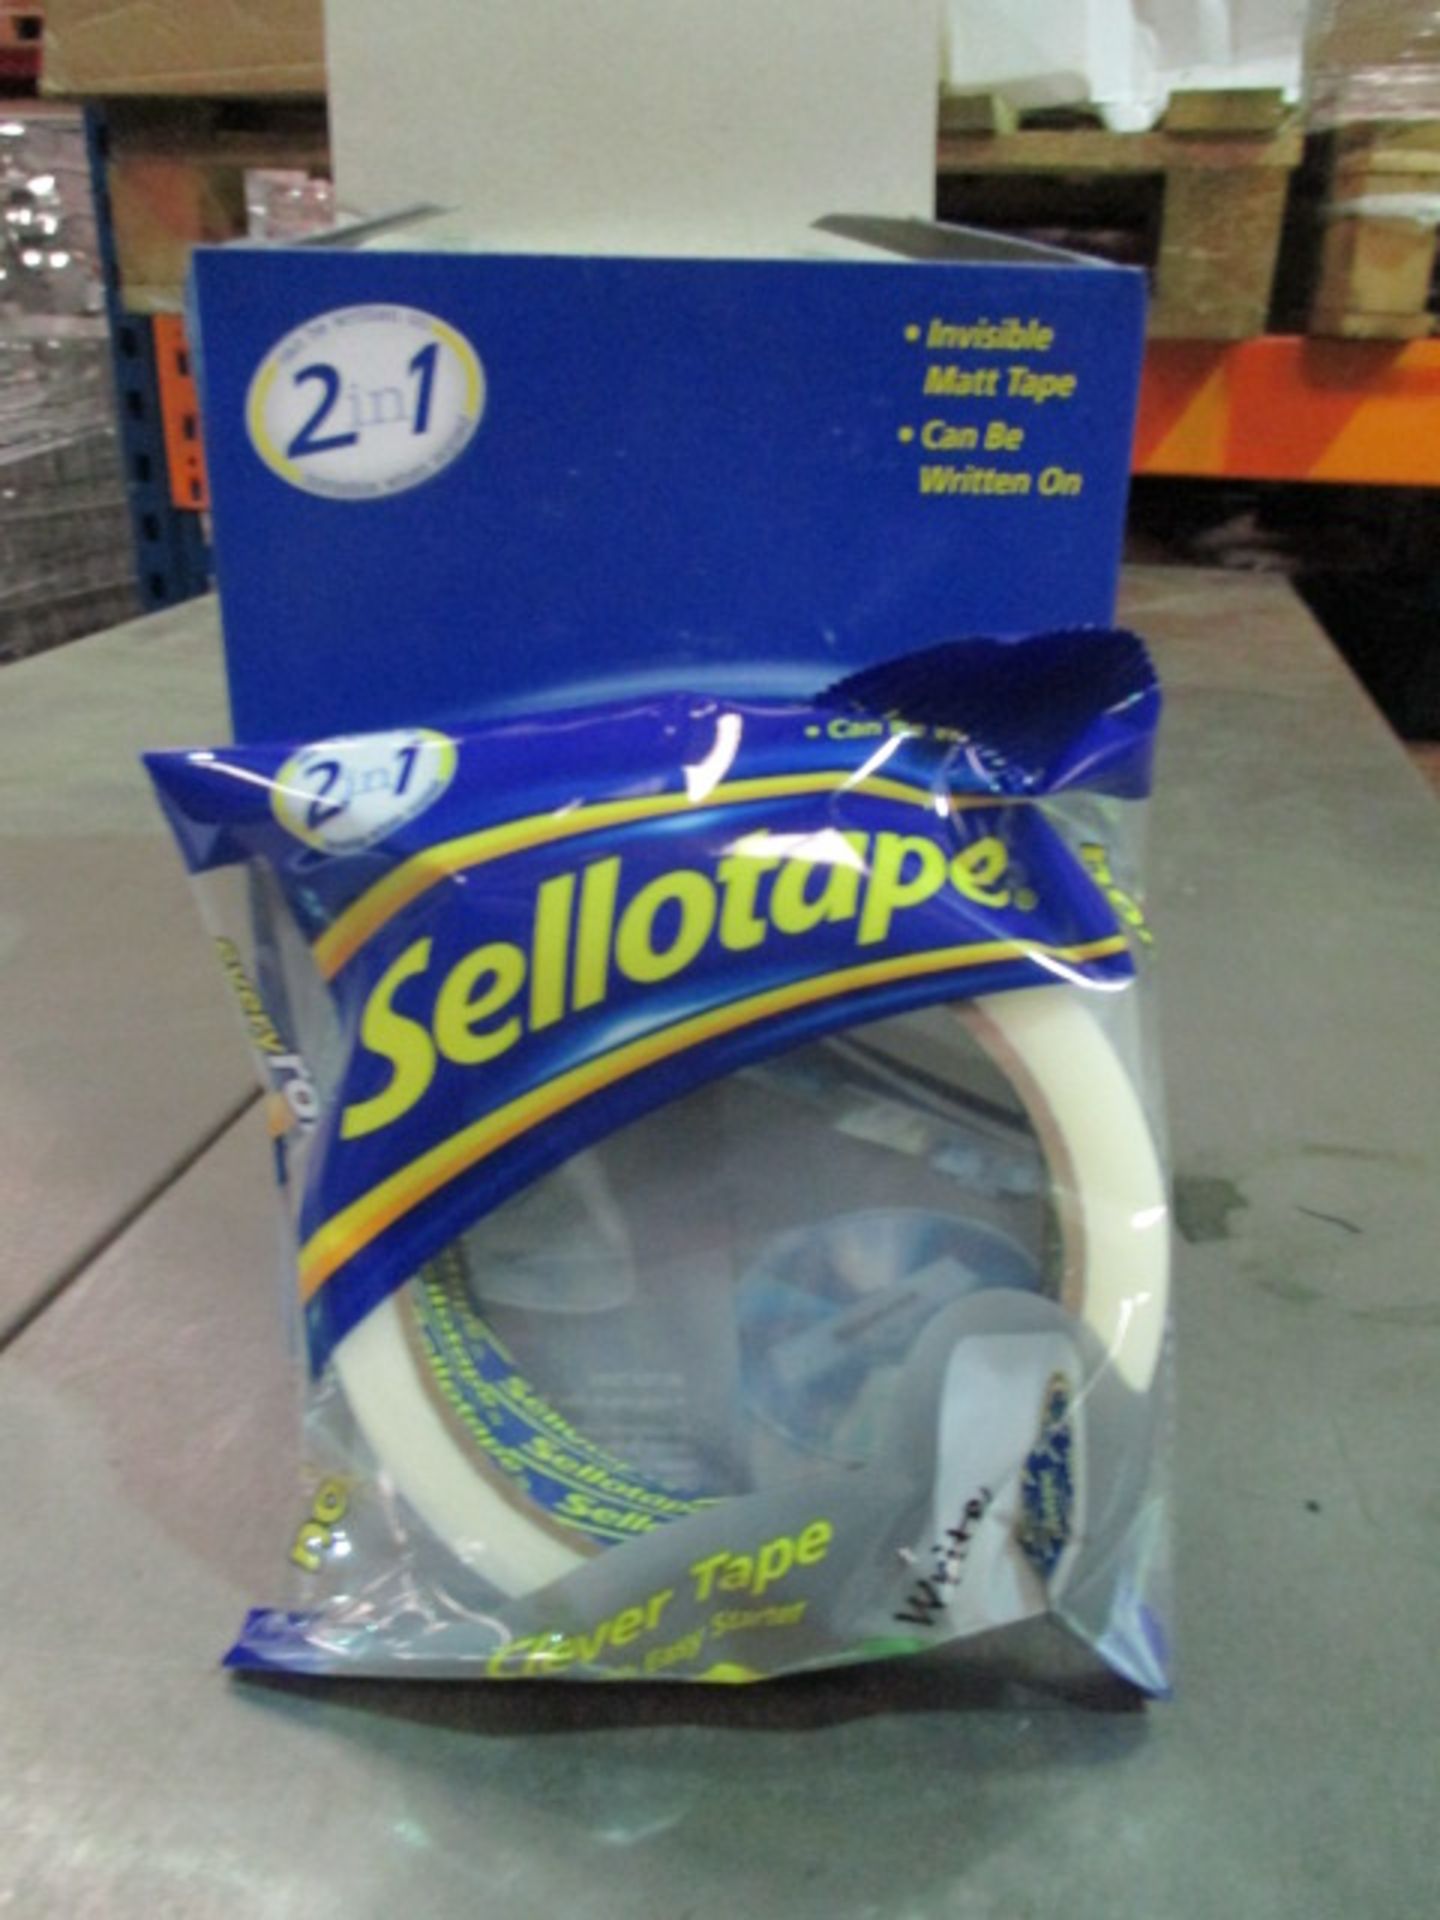 4 x Boxes of Sellotape 'Clever Tape' - 6 Rolls Per Box, 24 in Total - RRP £3.99 Per Roll - Image 2 of 4